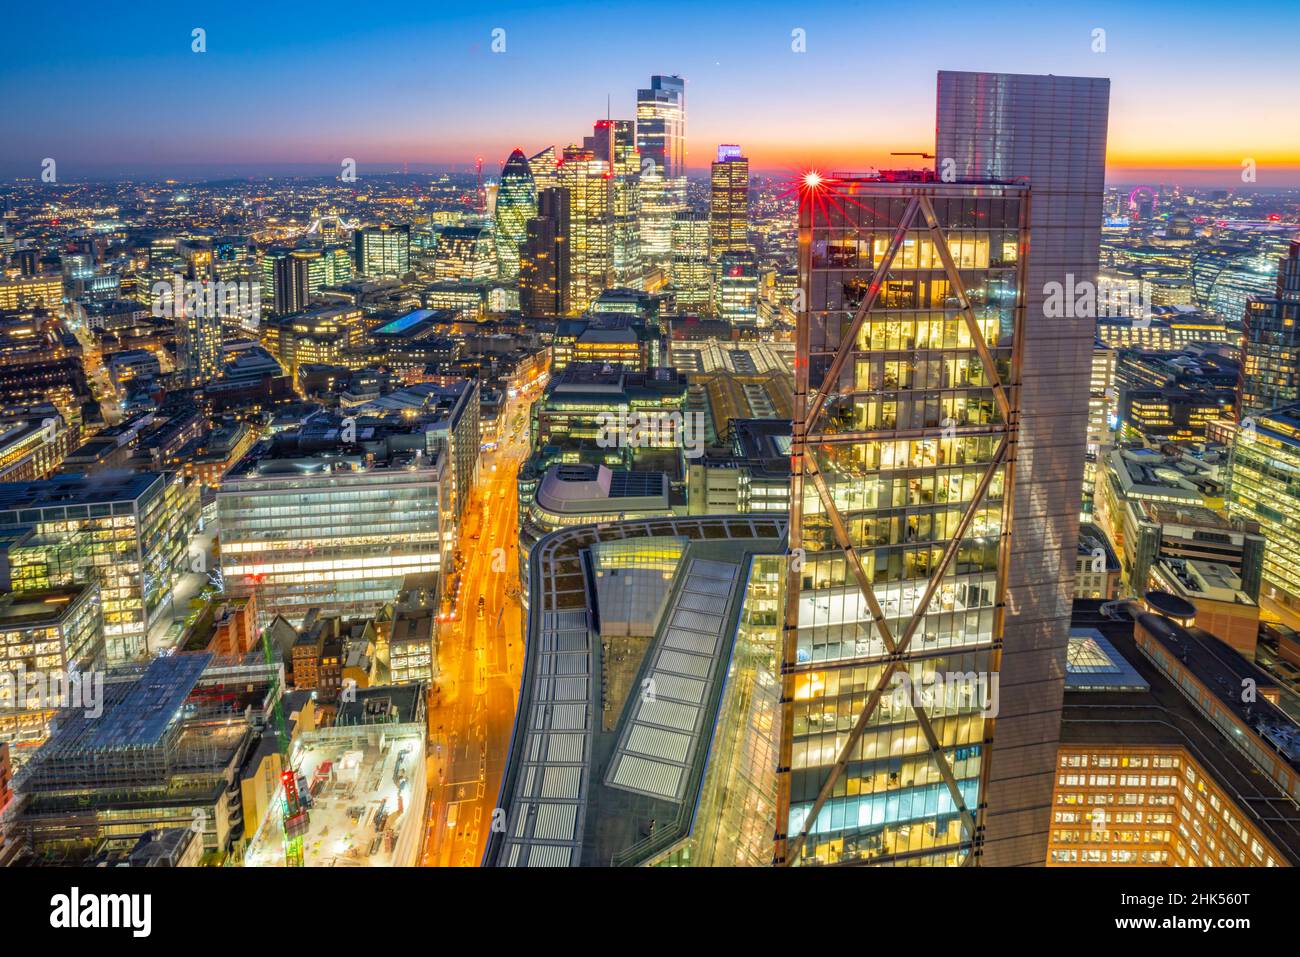 View of City of London skyscrapers at dusk from the Principal Tower, London, England, United Kingdom, Europe Stock Photo